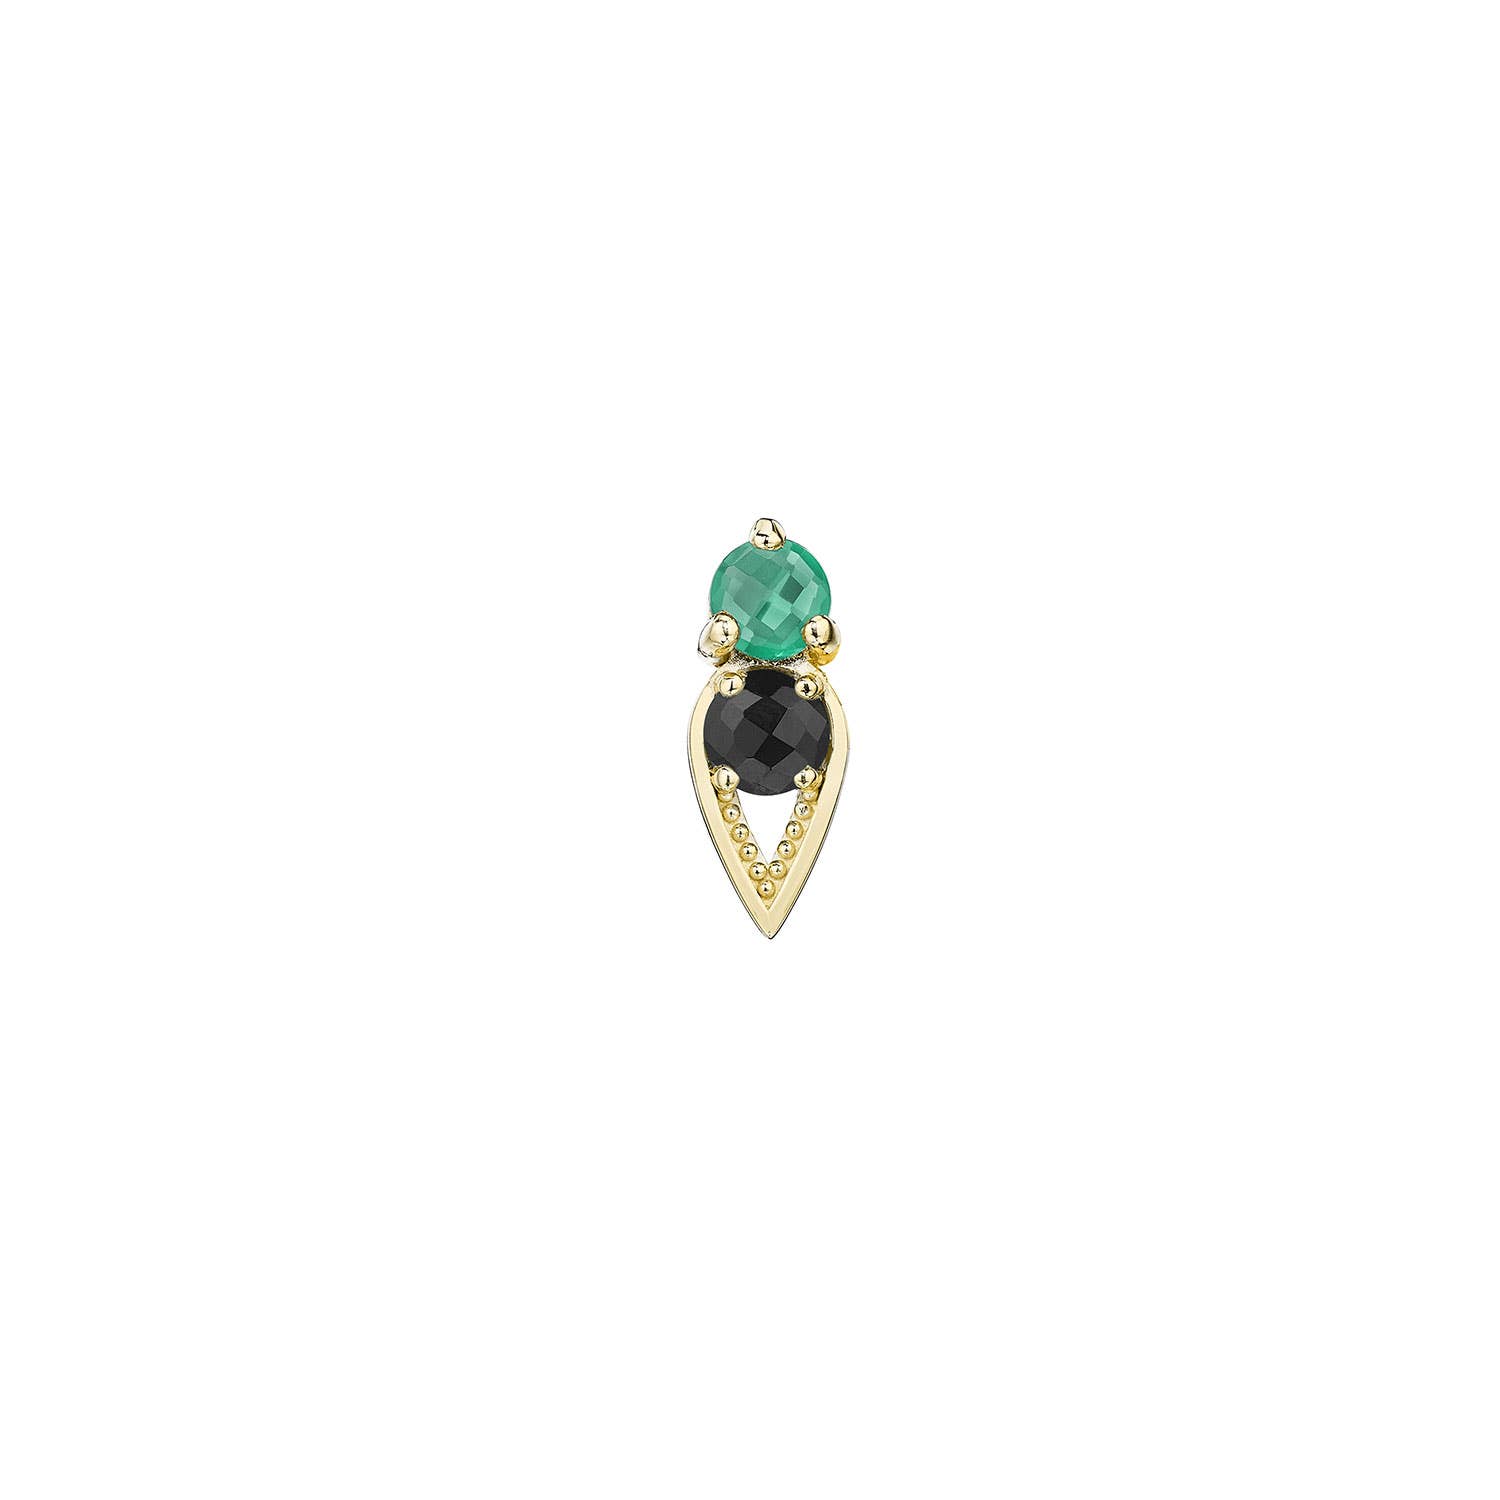 Petite Open Crescent Earrings with Black and Green Onyx